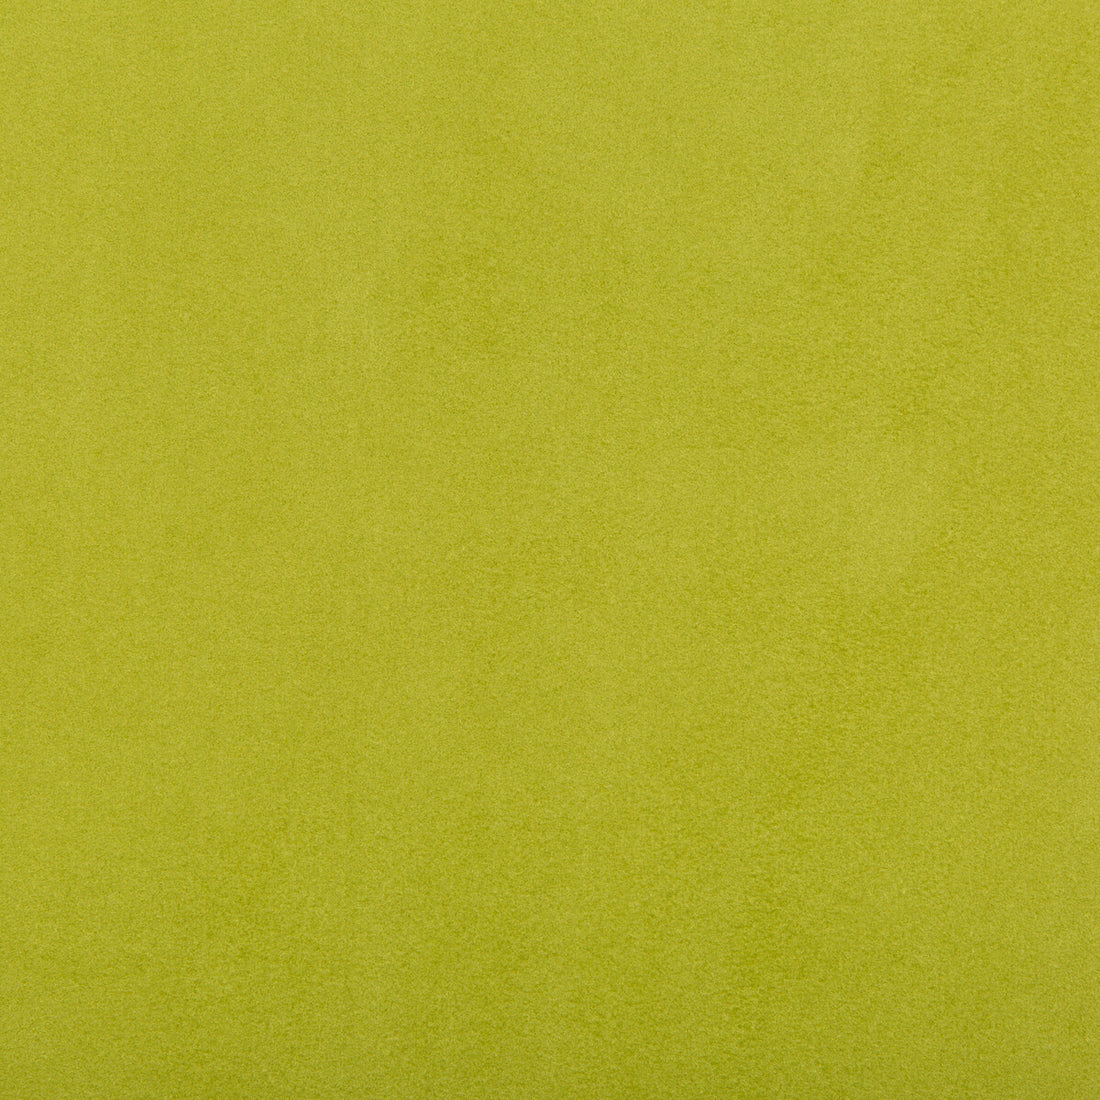 Ultimate fabric in key lime color - pattern 960122.333.0 - by Lee Jofa in the Ultimate Suede collection